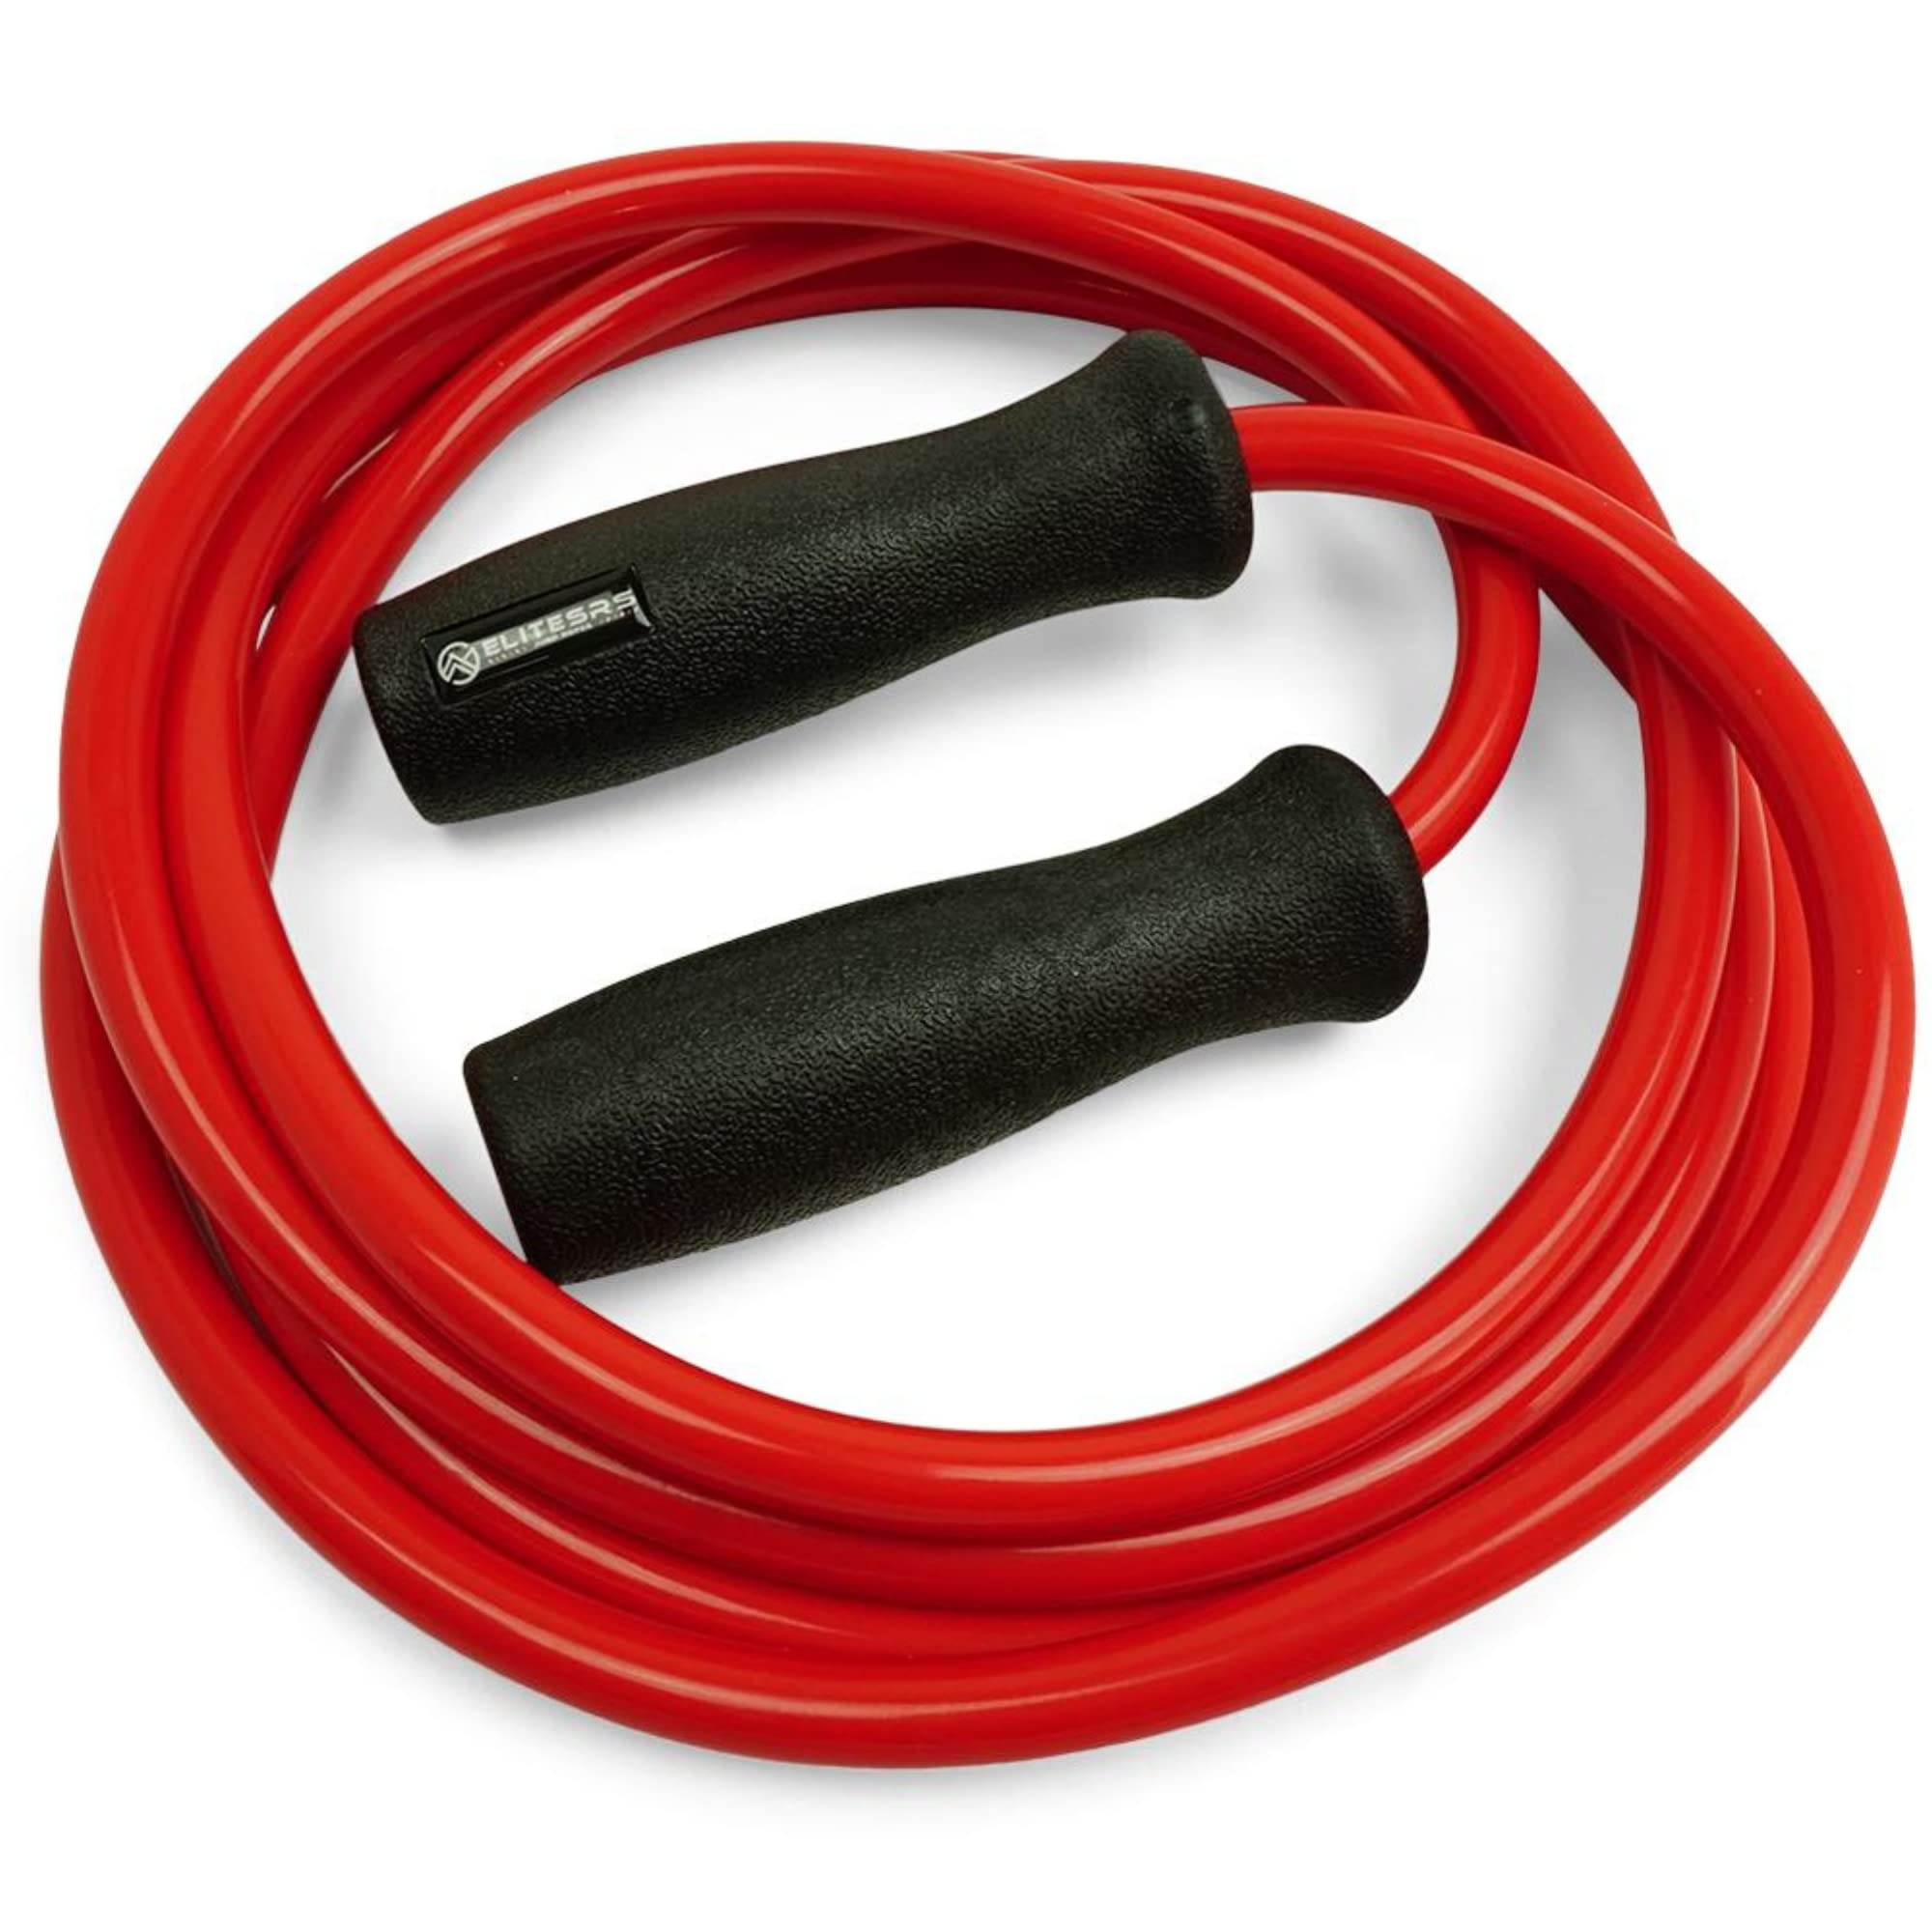 Elite SRS, Muay Thai 2.0 Weighted Jump Rope - Designed for High